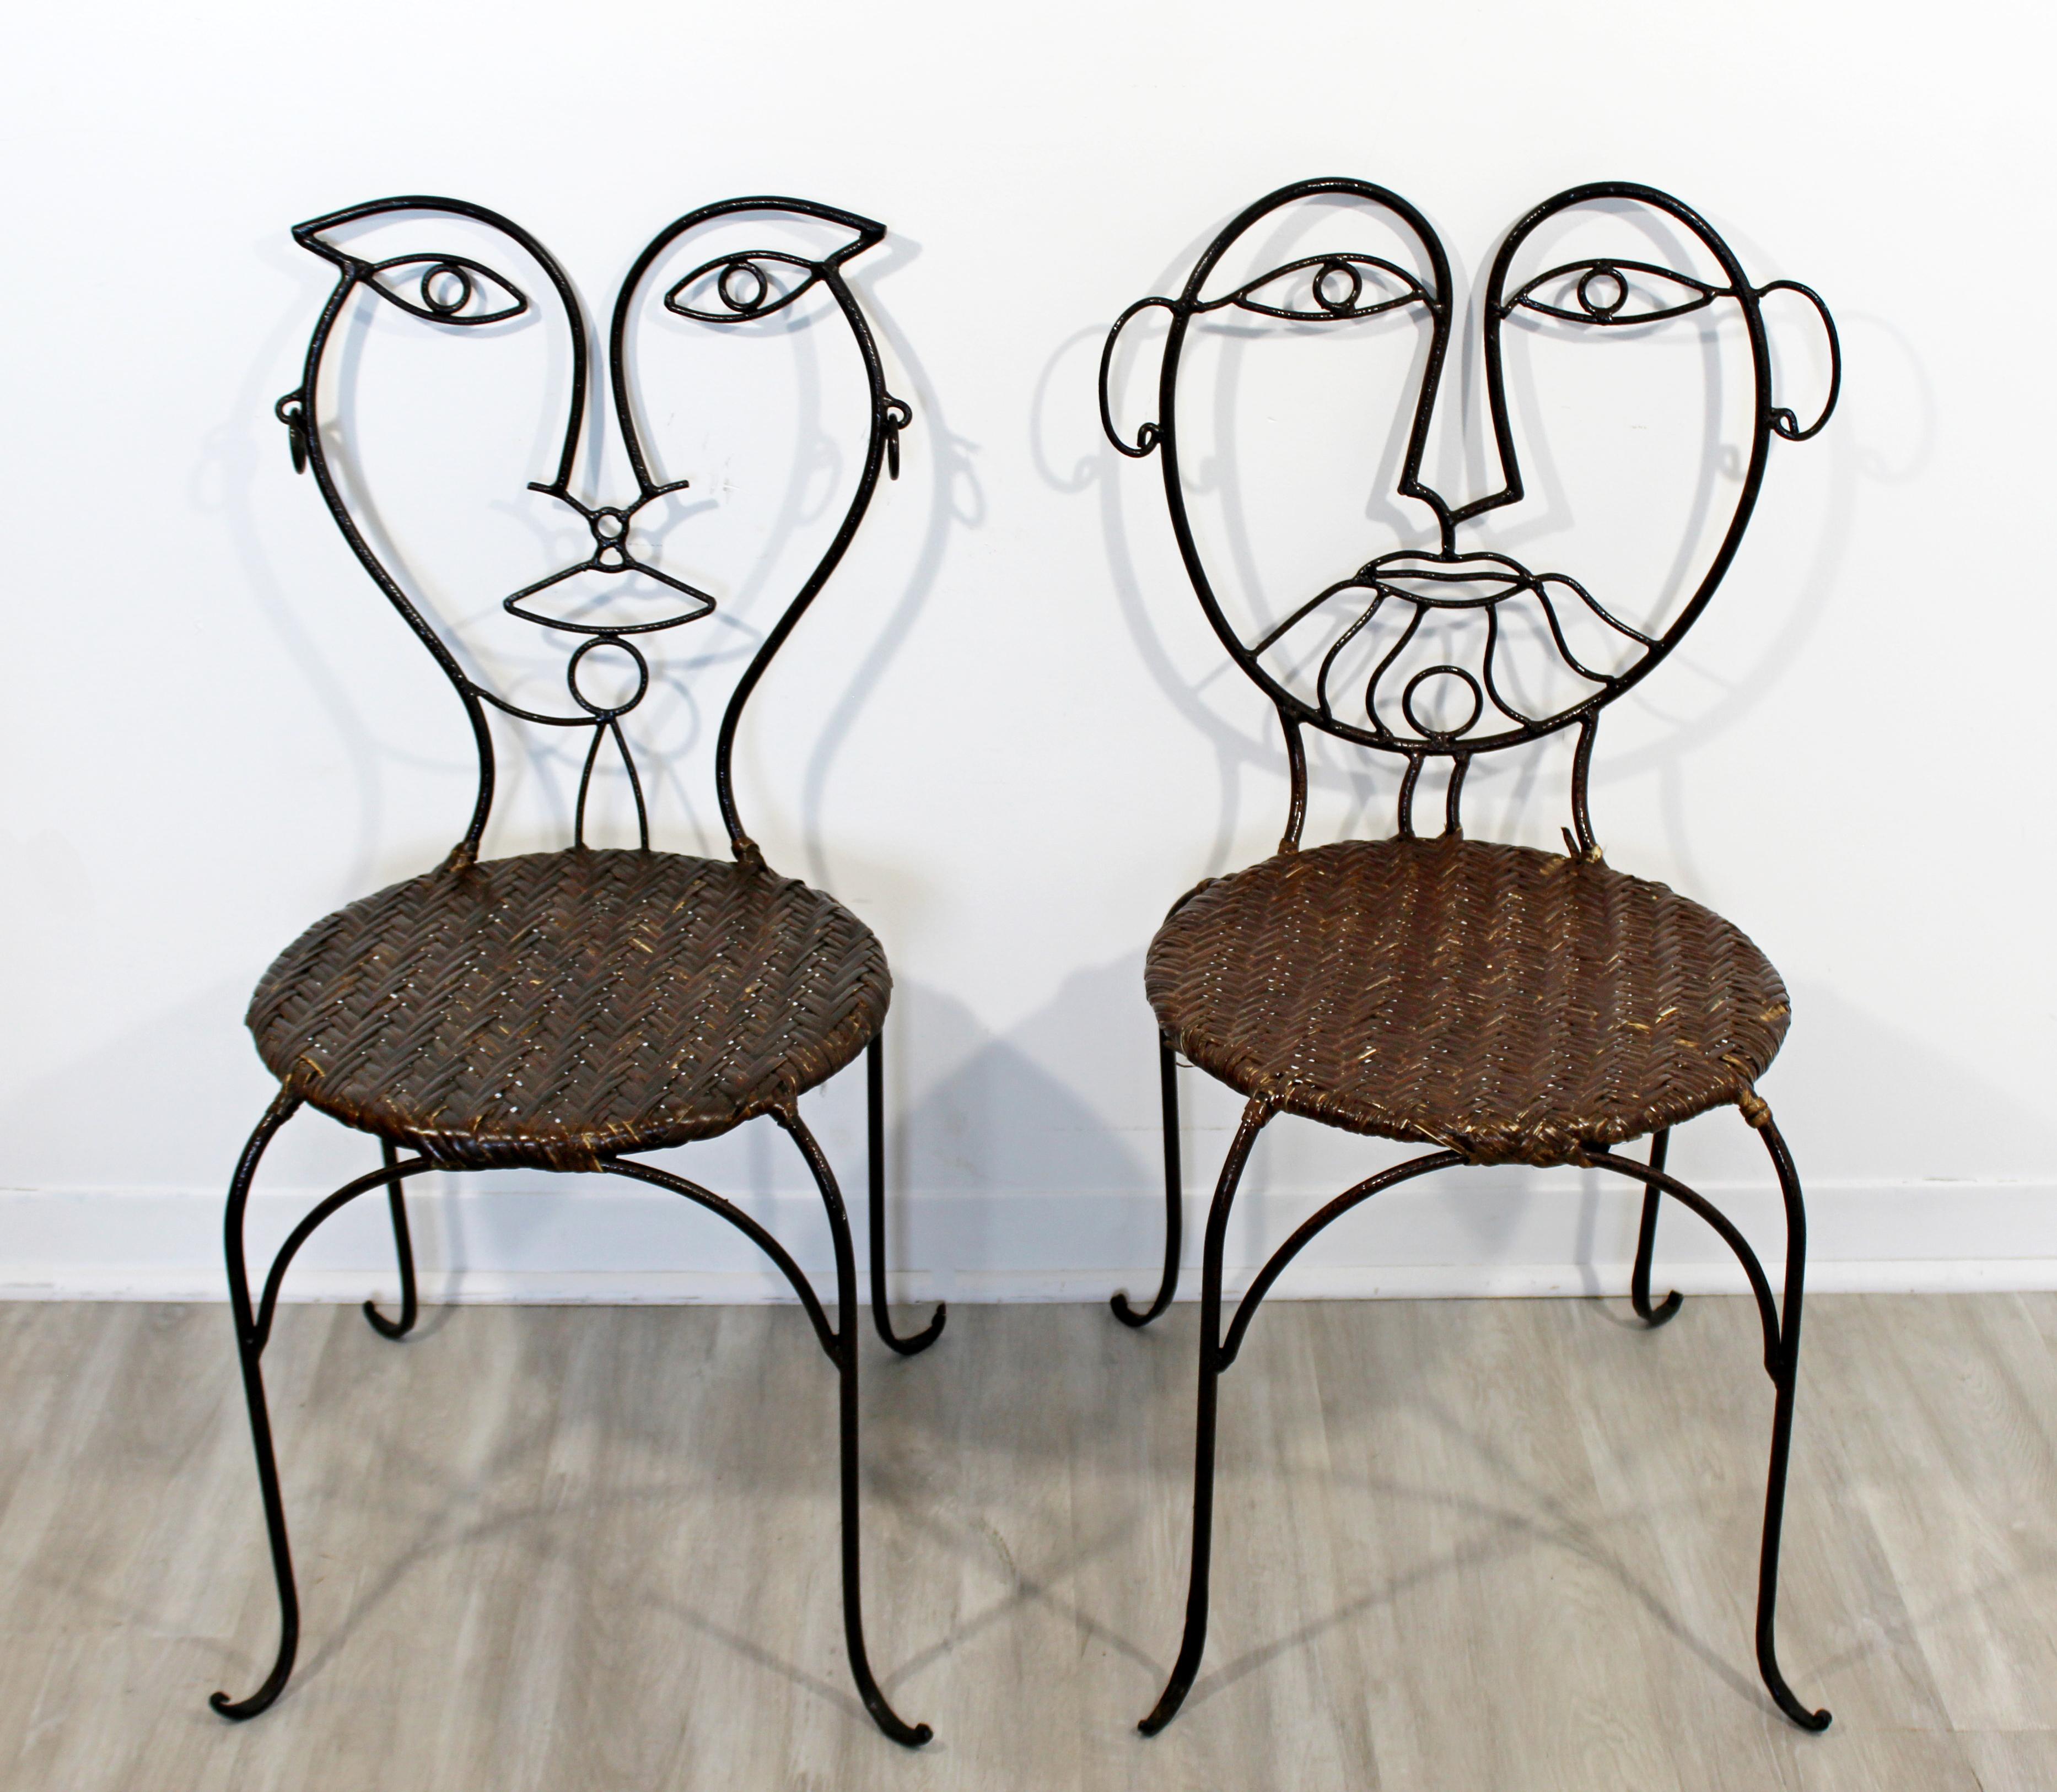 For your consideration is a whimsical pair of cafe art side chairs, made of wrought iron and with rattan seats. In excellent vintage condition. The dimensions are 17